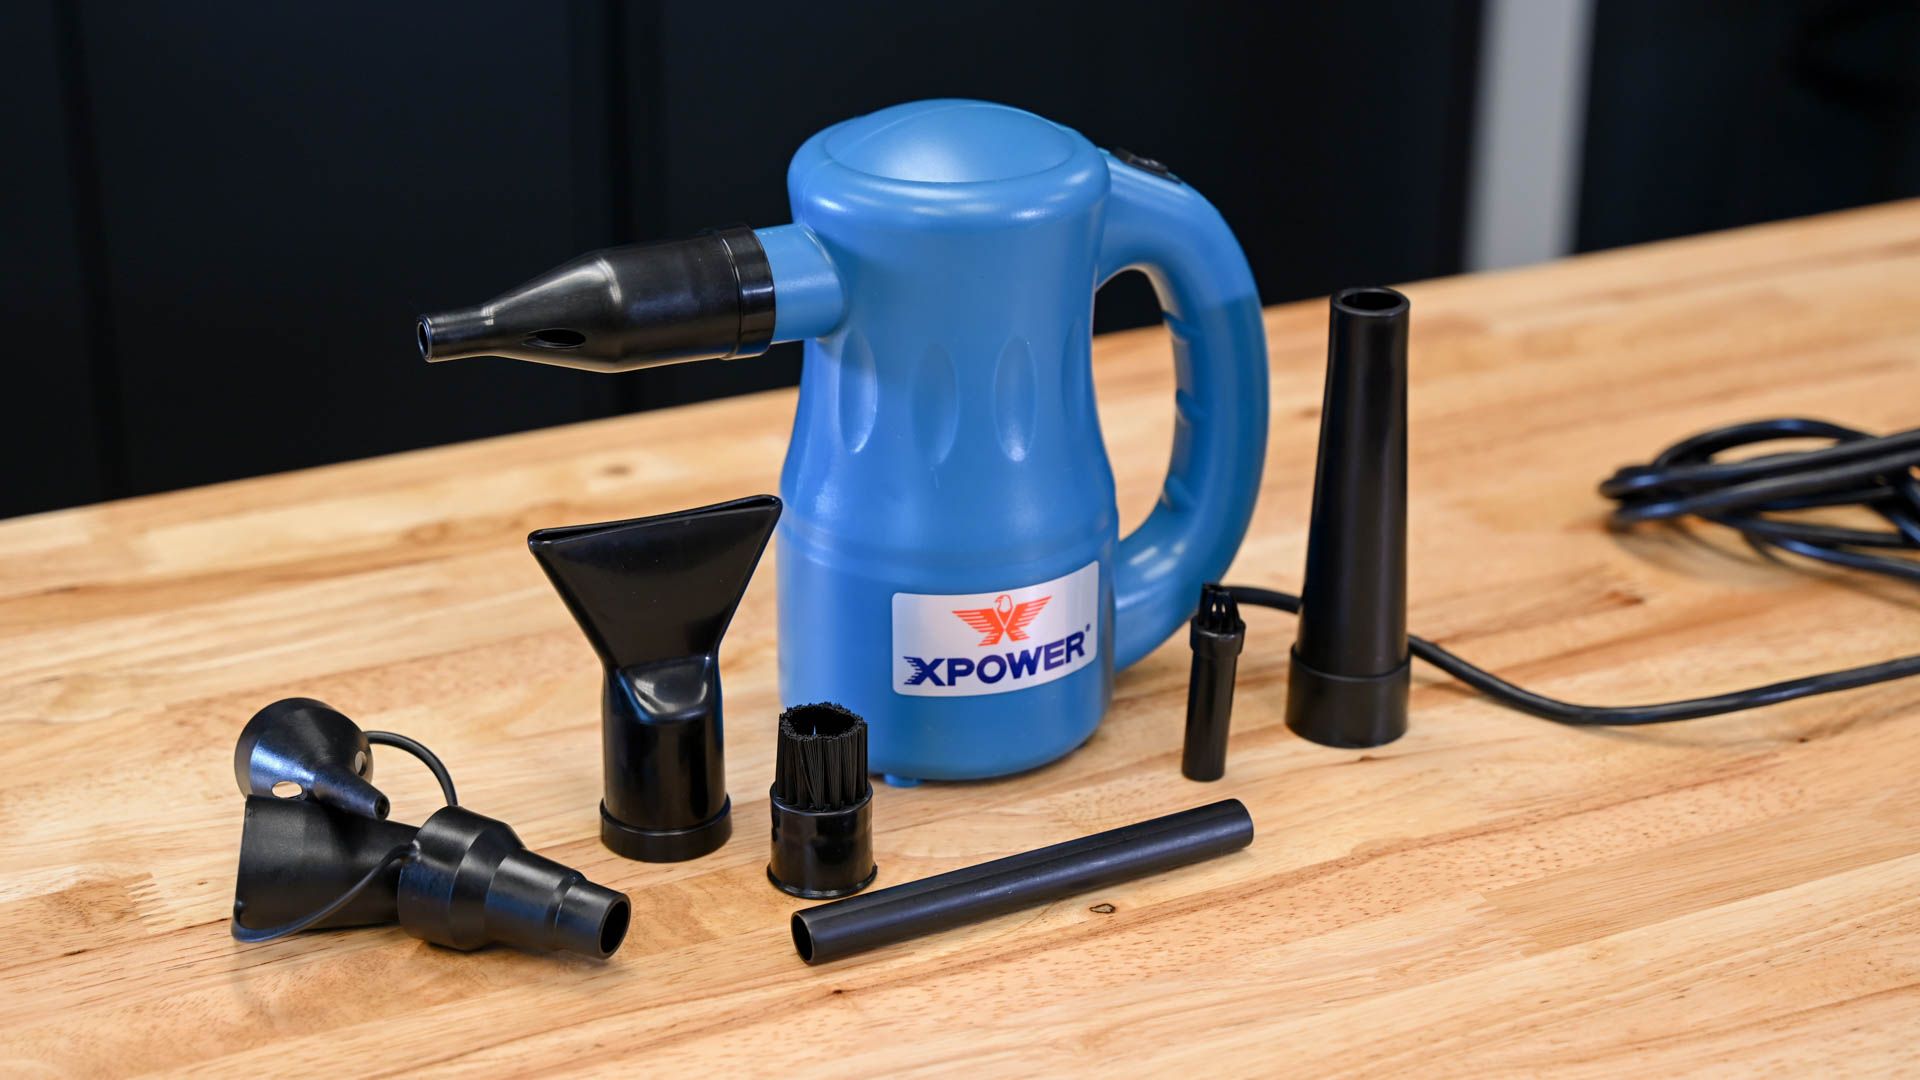 XPOWER Electric Air Duster surrounded by attachments and nozzles